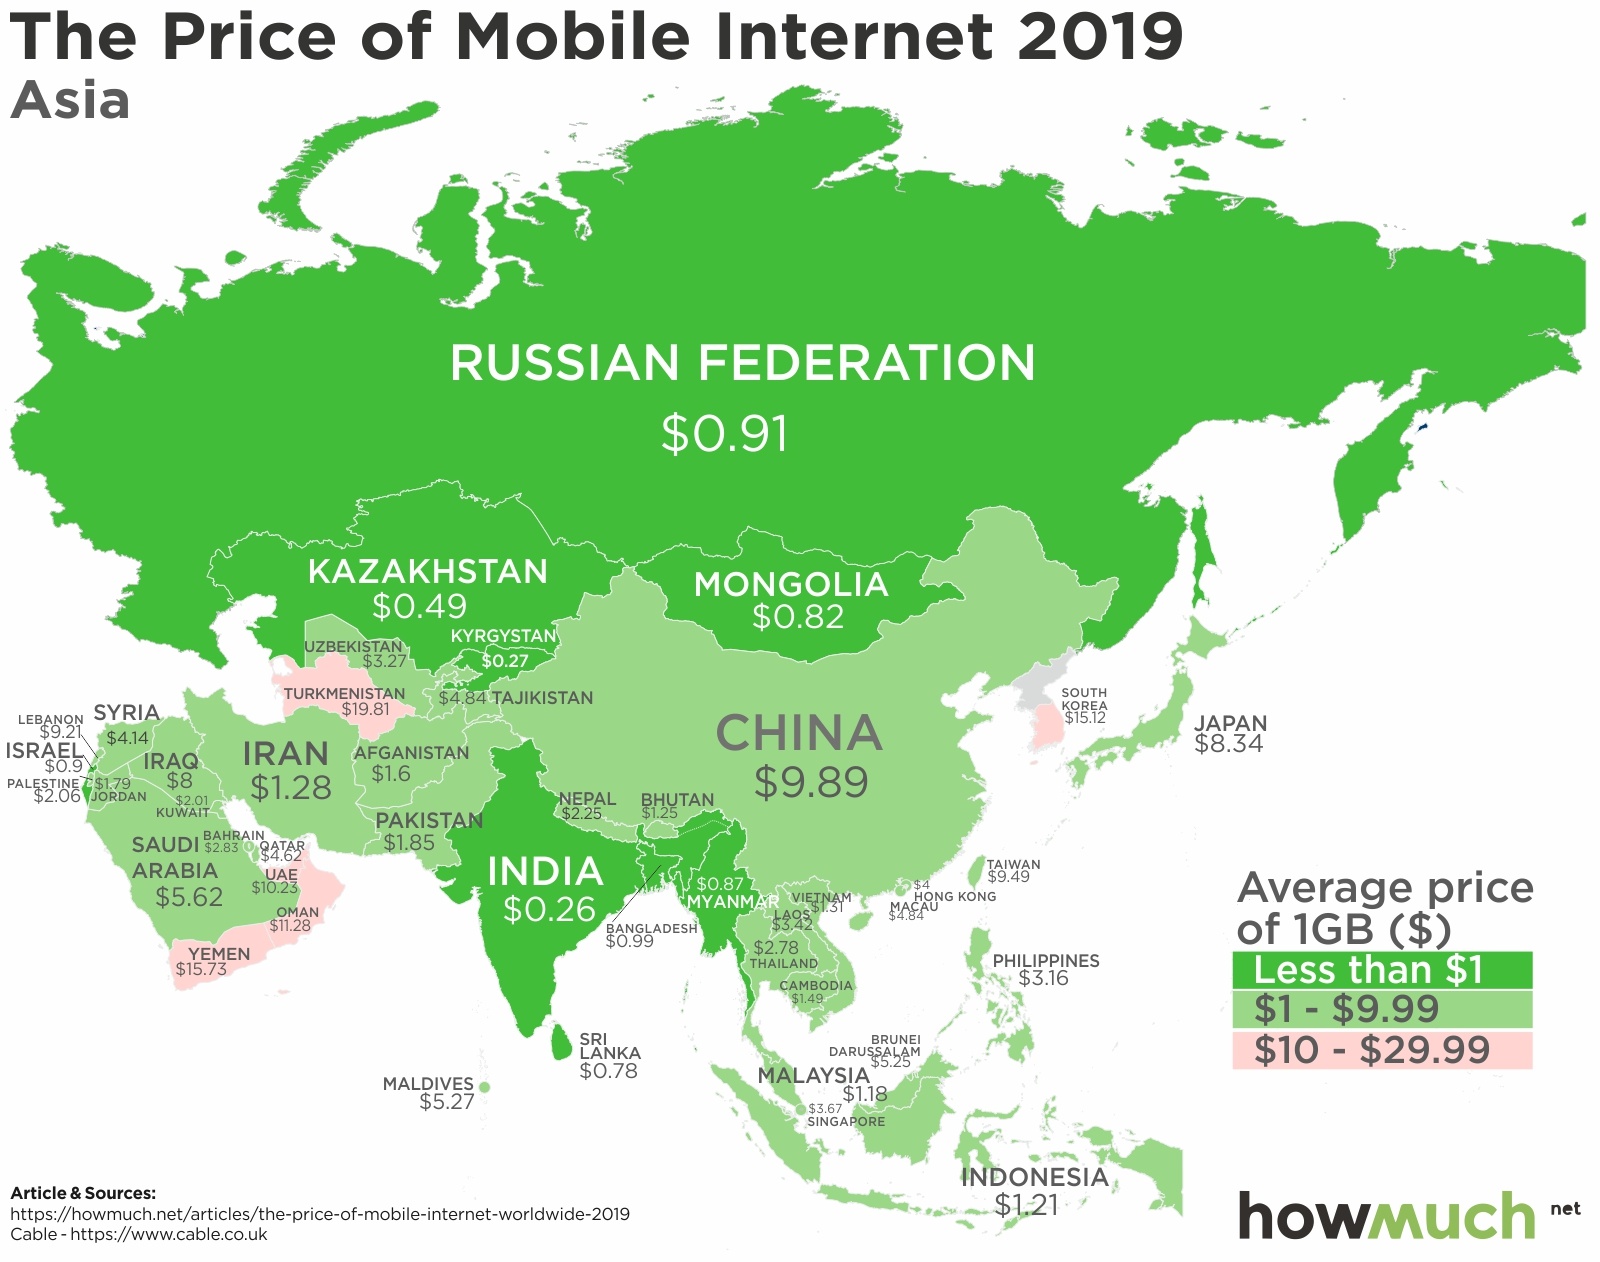 the-price-of-mobile-internet-worldwide-2019-Asia-9536.jpg